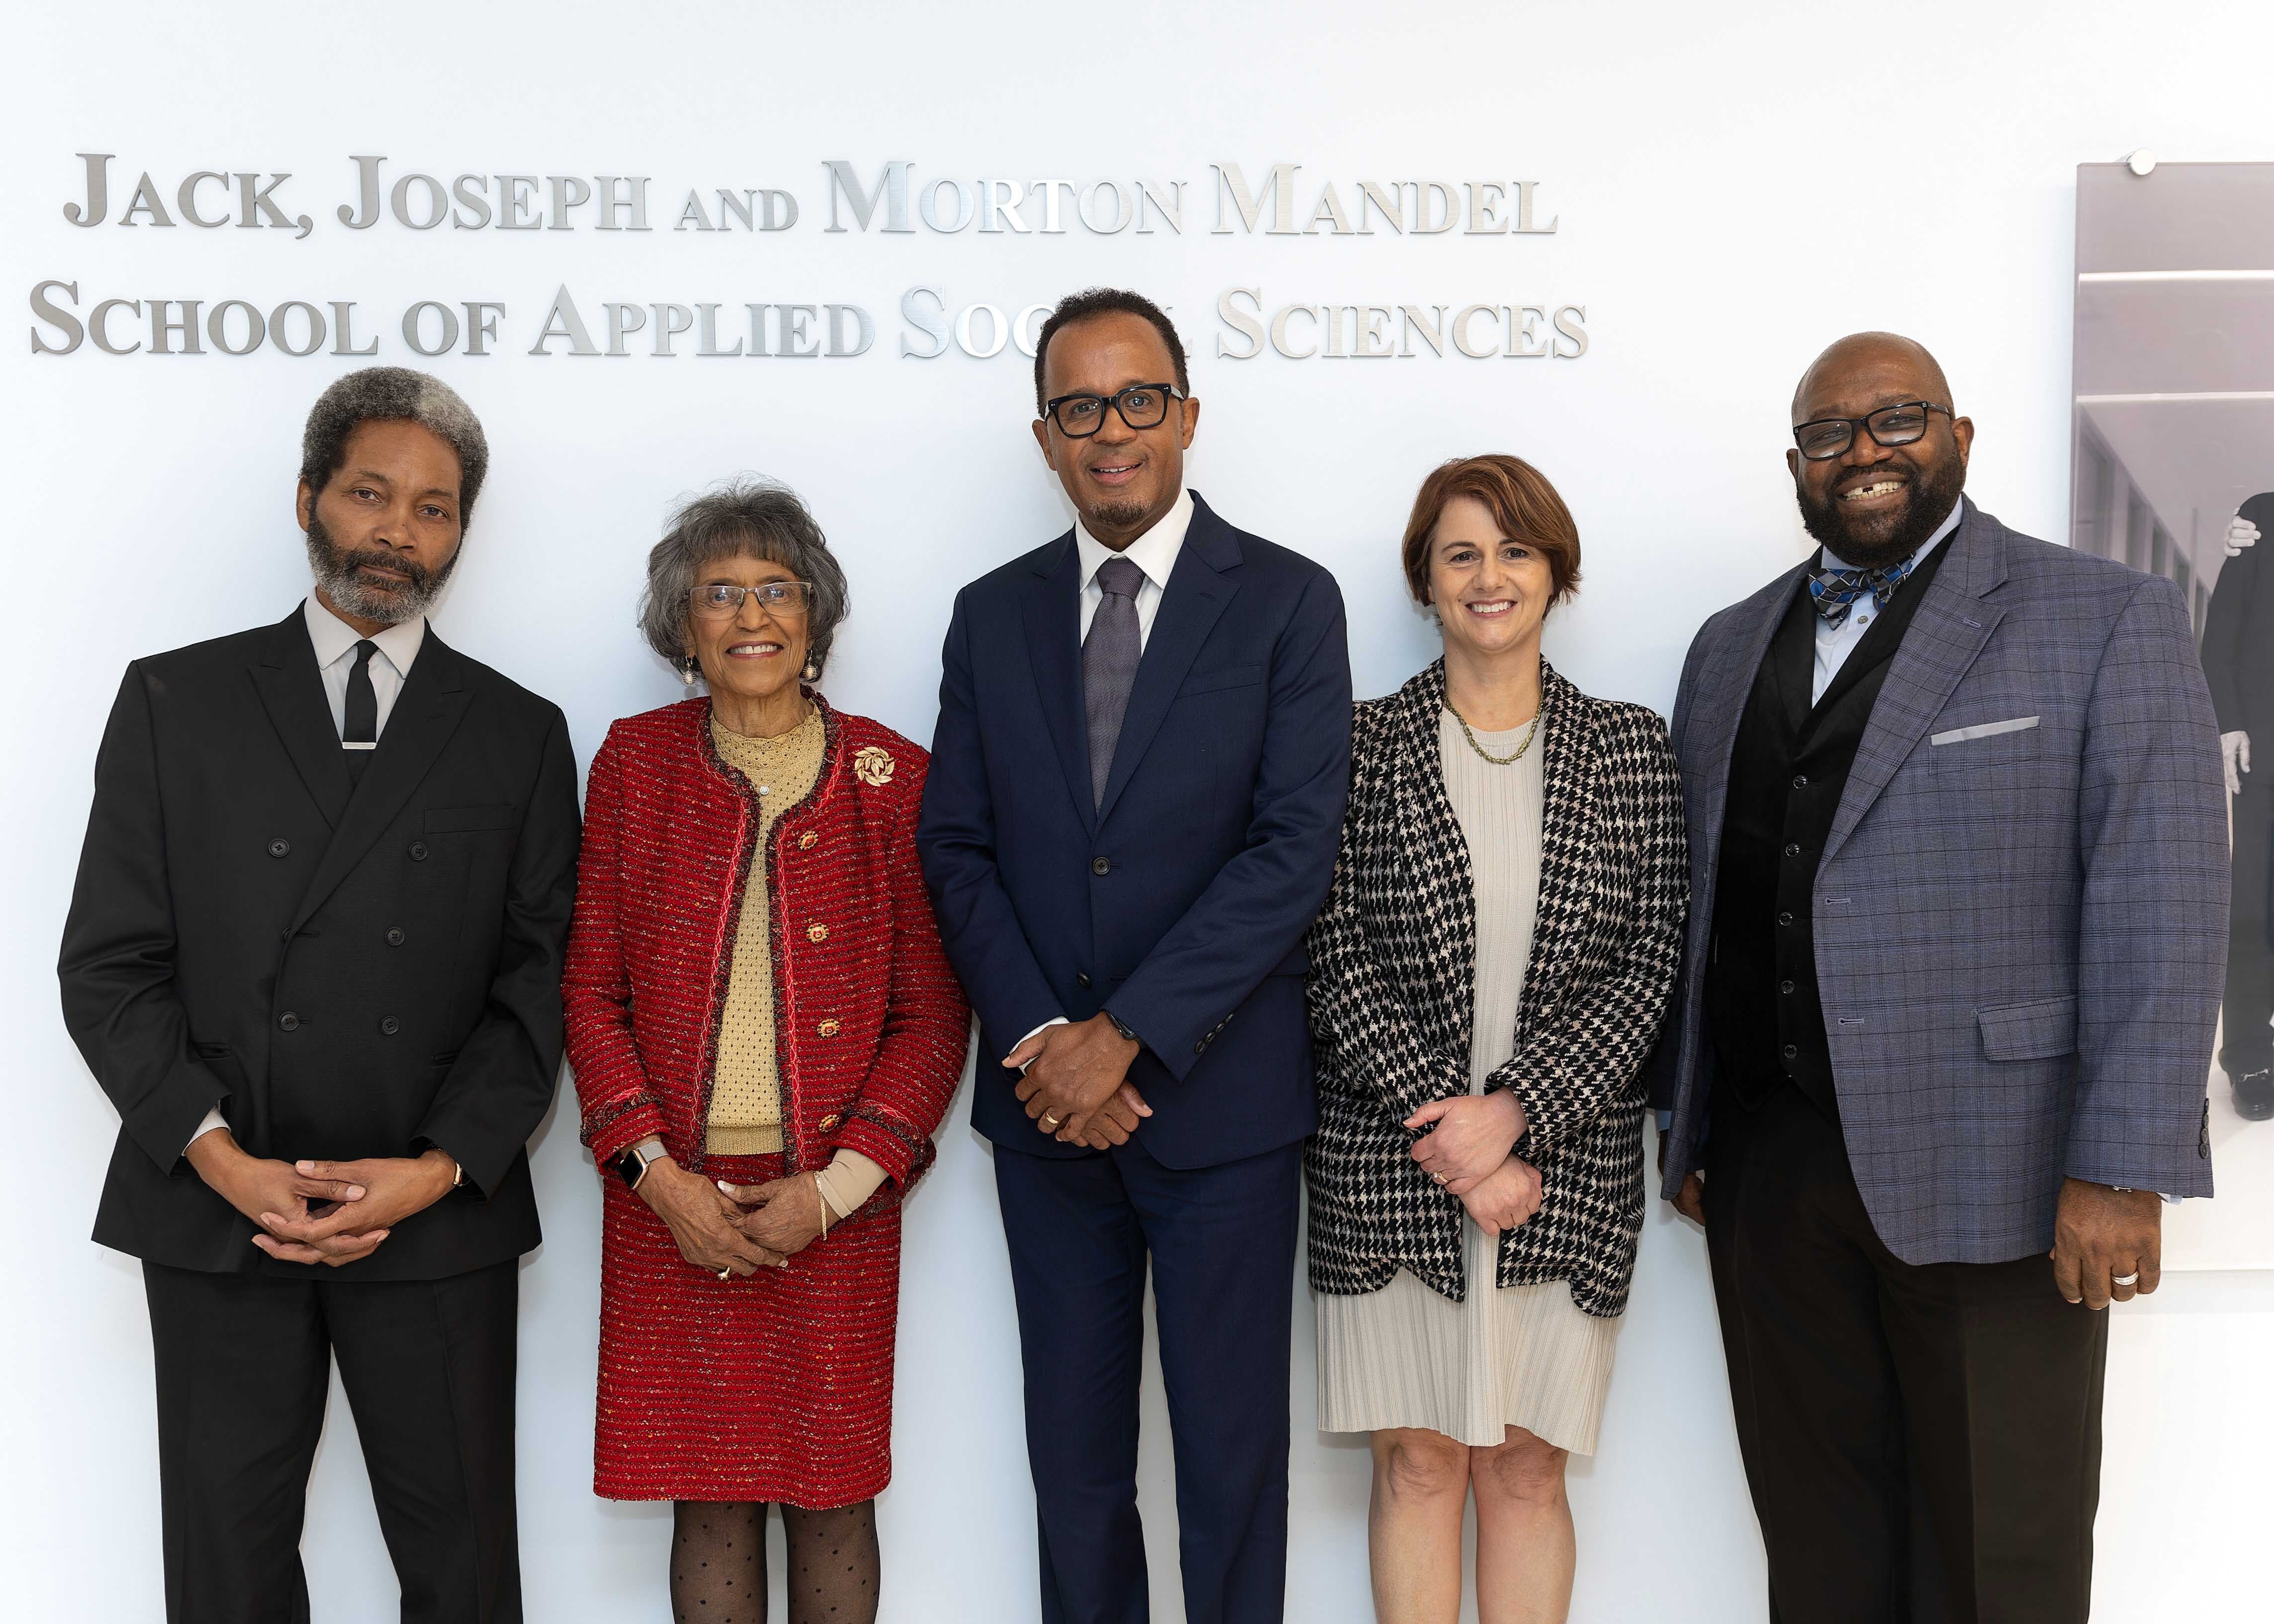 A group of five people dressed formally, in front of a wall that reads Jack, Joseph and Morton Mandel School of Applied Social Sciences